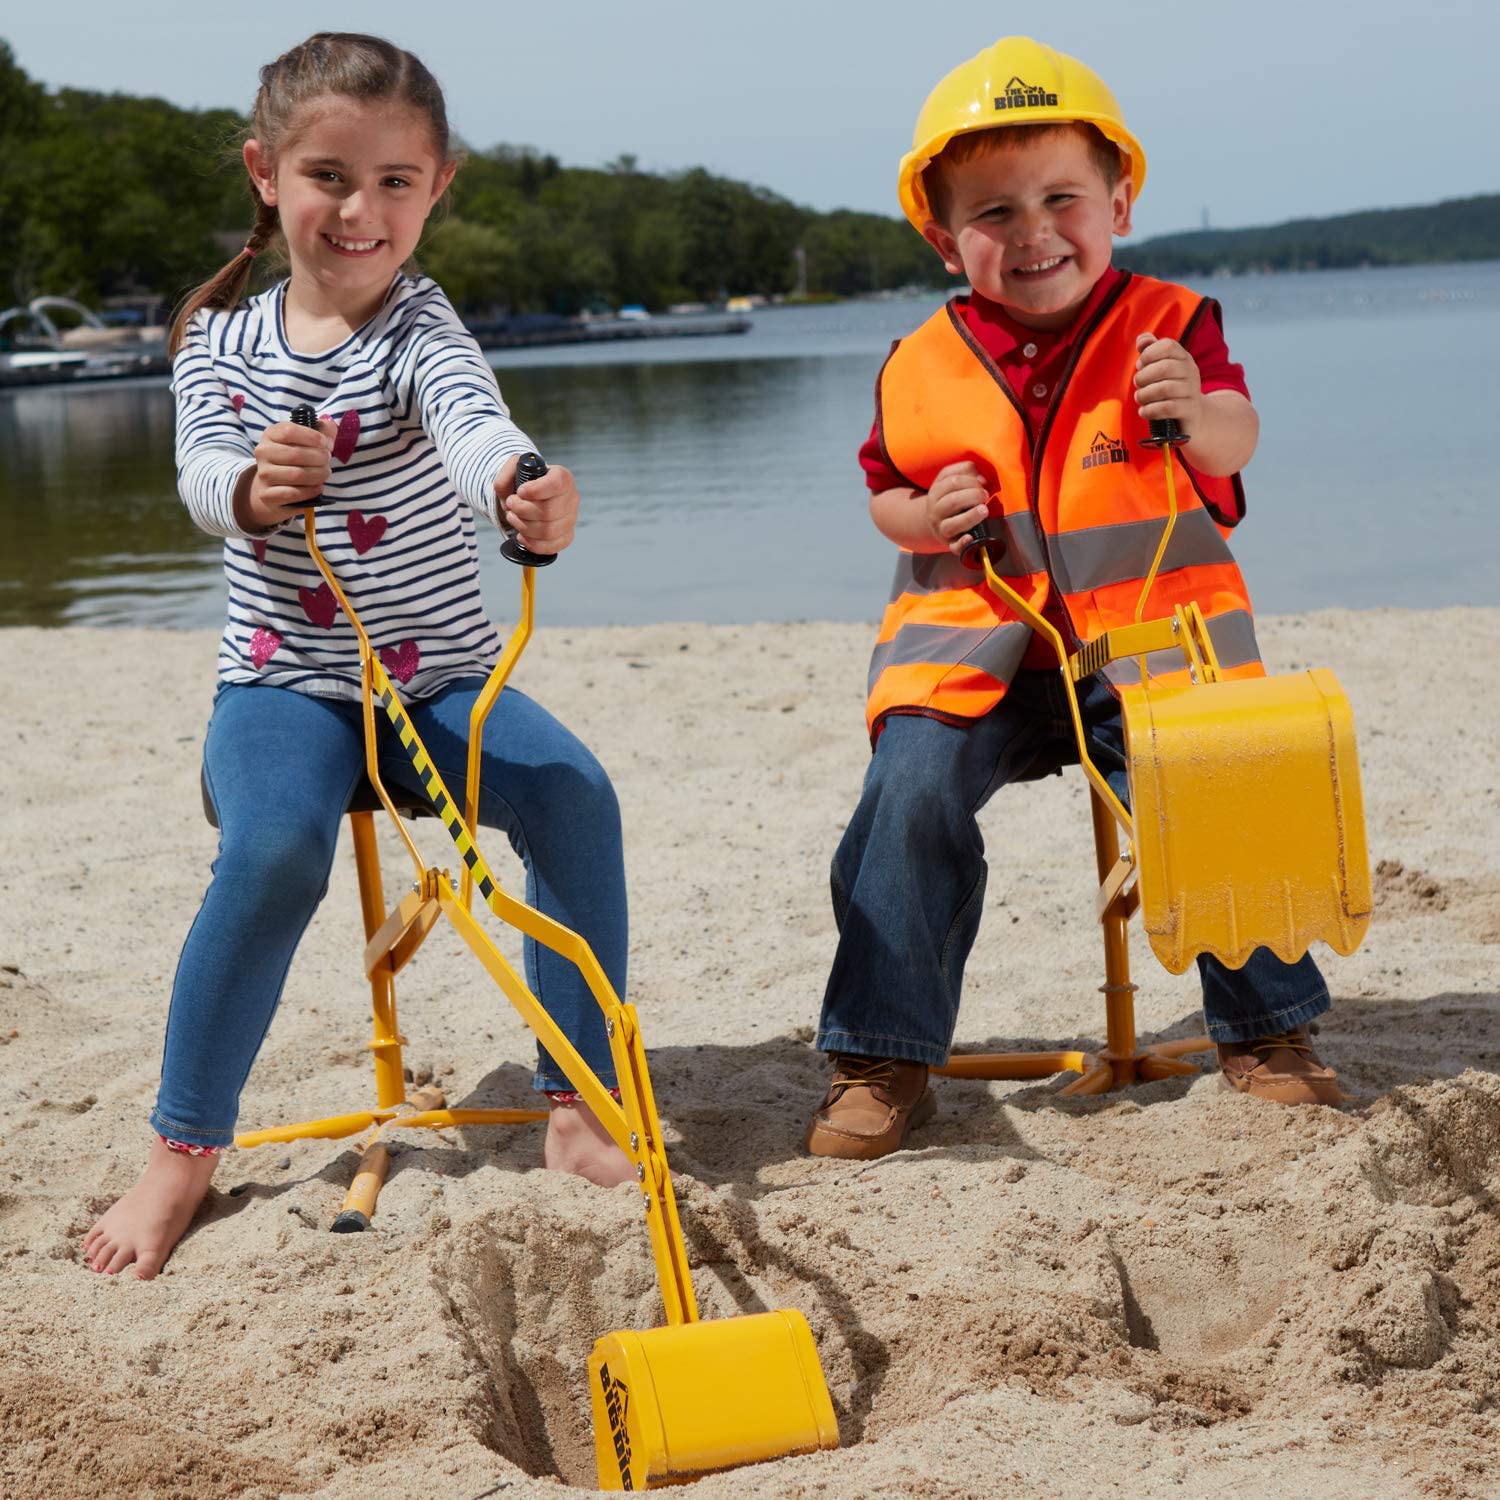 Two kids playing with sand diggers